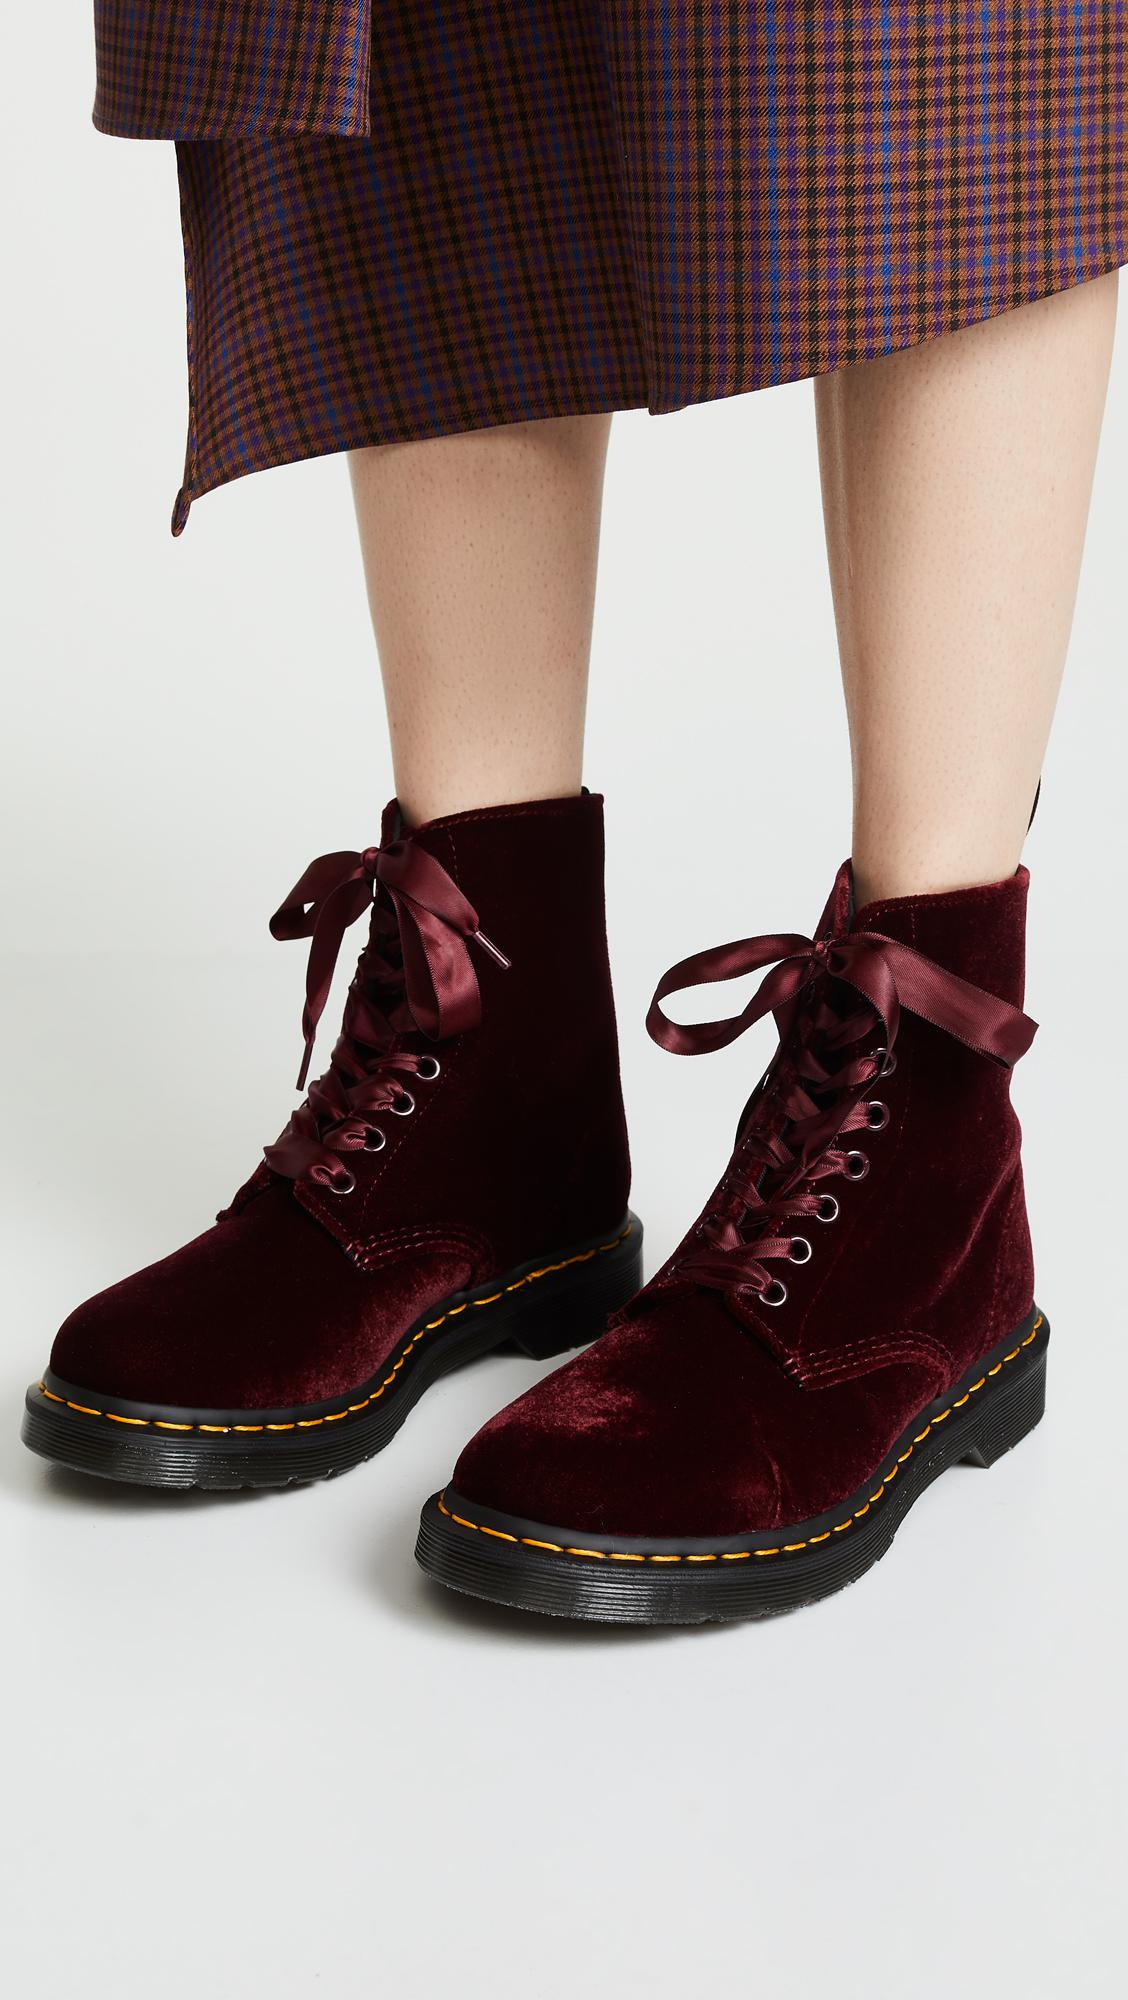 Dr. Martens 1460 Pascal Velvet 8 Eye Boots in Cherry Red (Red) - Lyst